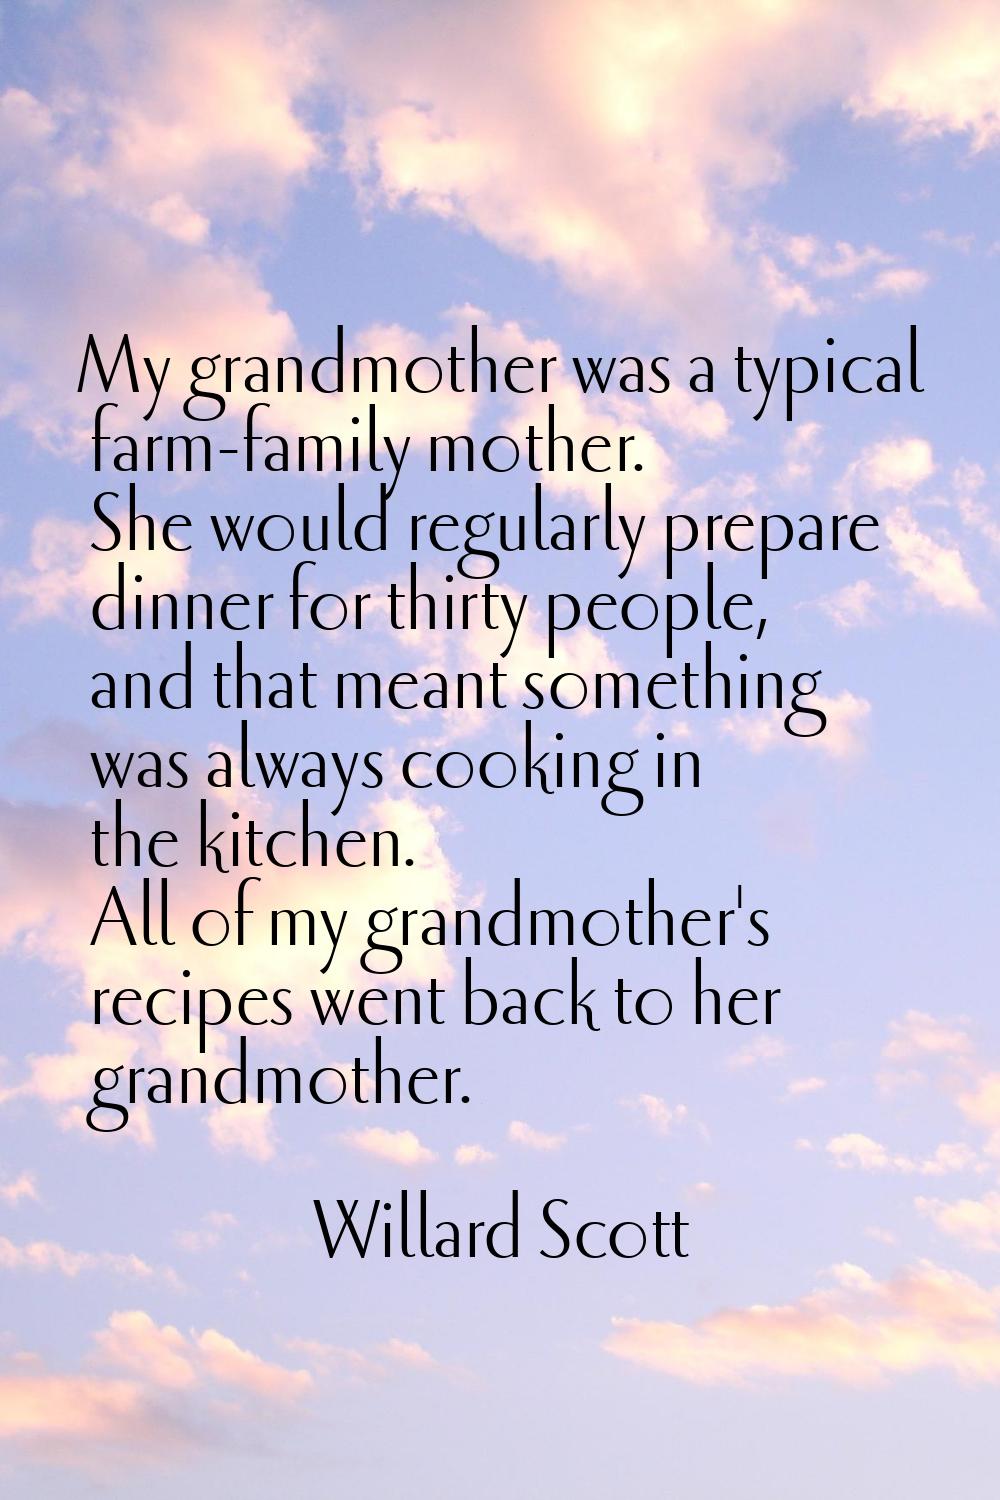 My grandmother was a typical farm-family mother. She would regularly prepare dinner for thirty peop